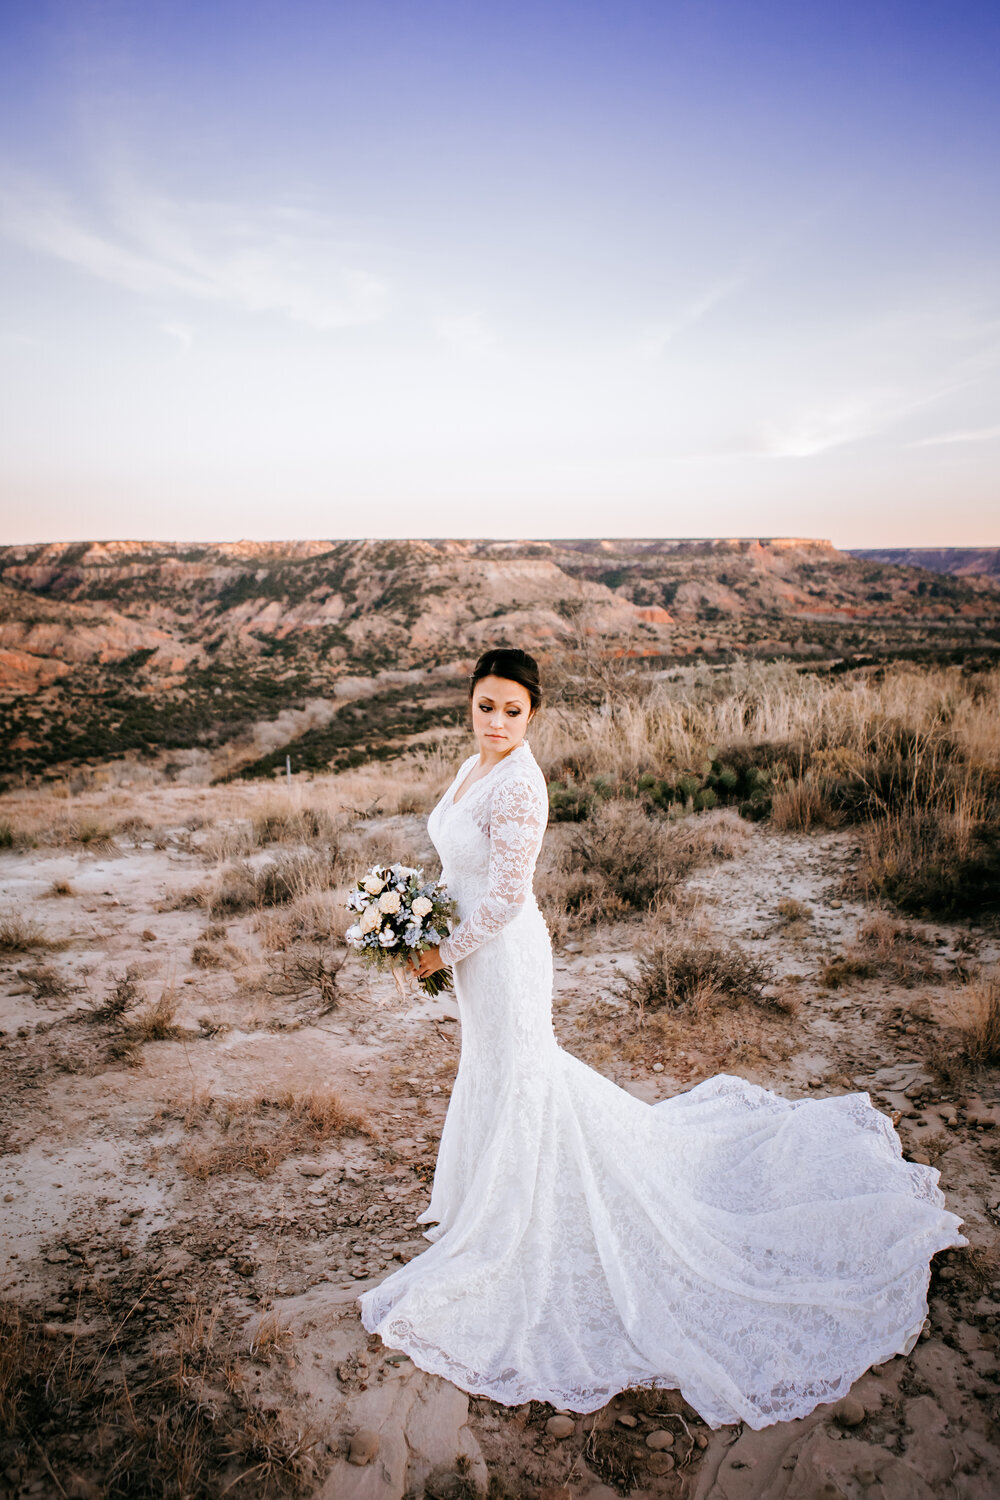  This portrait of the bride is breathtaking against the Palo Duro Canyon backdrop on her wedding day #tealawardphotography #texasweddings #amarillophotographer #amarilloweddingphotographer #emotionalphotography #intimateweddingphotography #weddingday #weddingphotos #texasphotographer #inspiredwedding #intimatewedding #weddingformals #bigday #portraits 